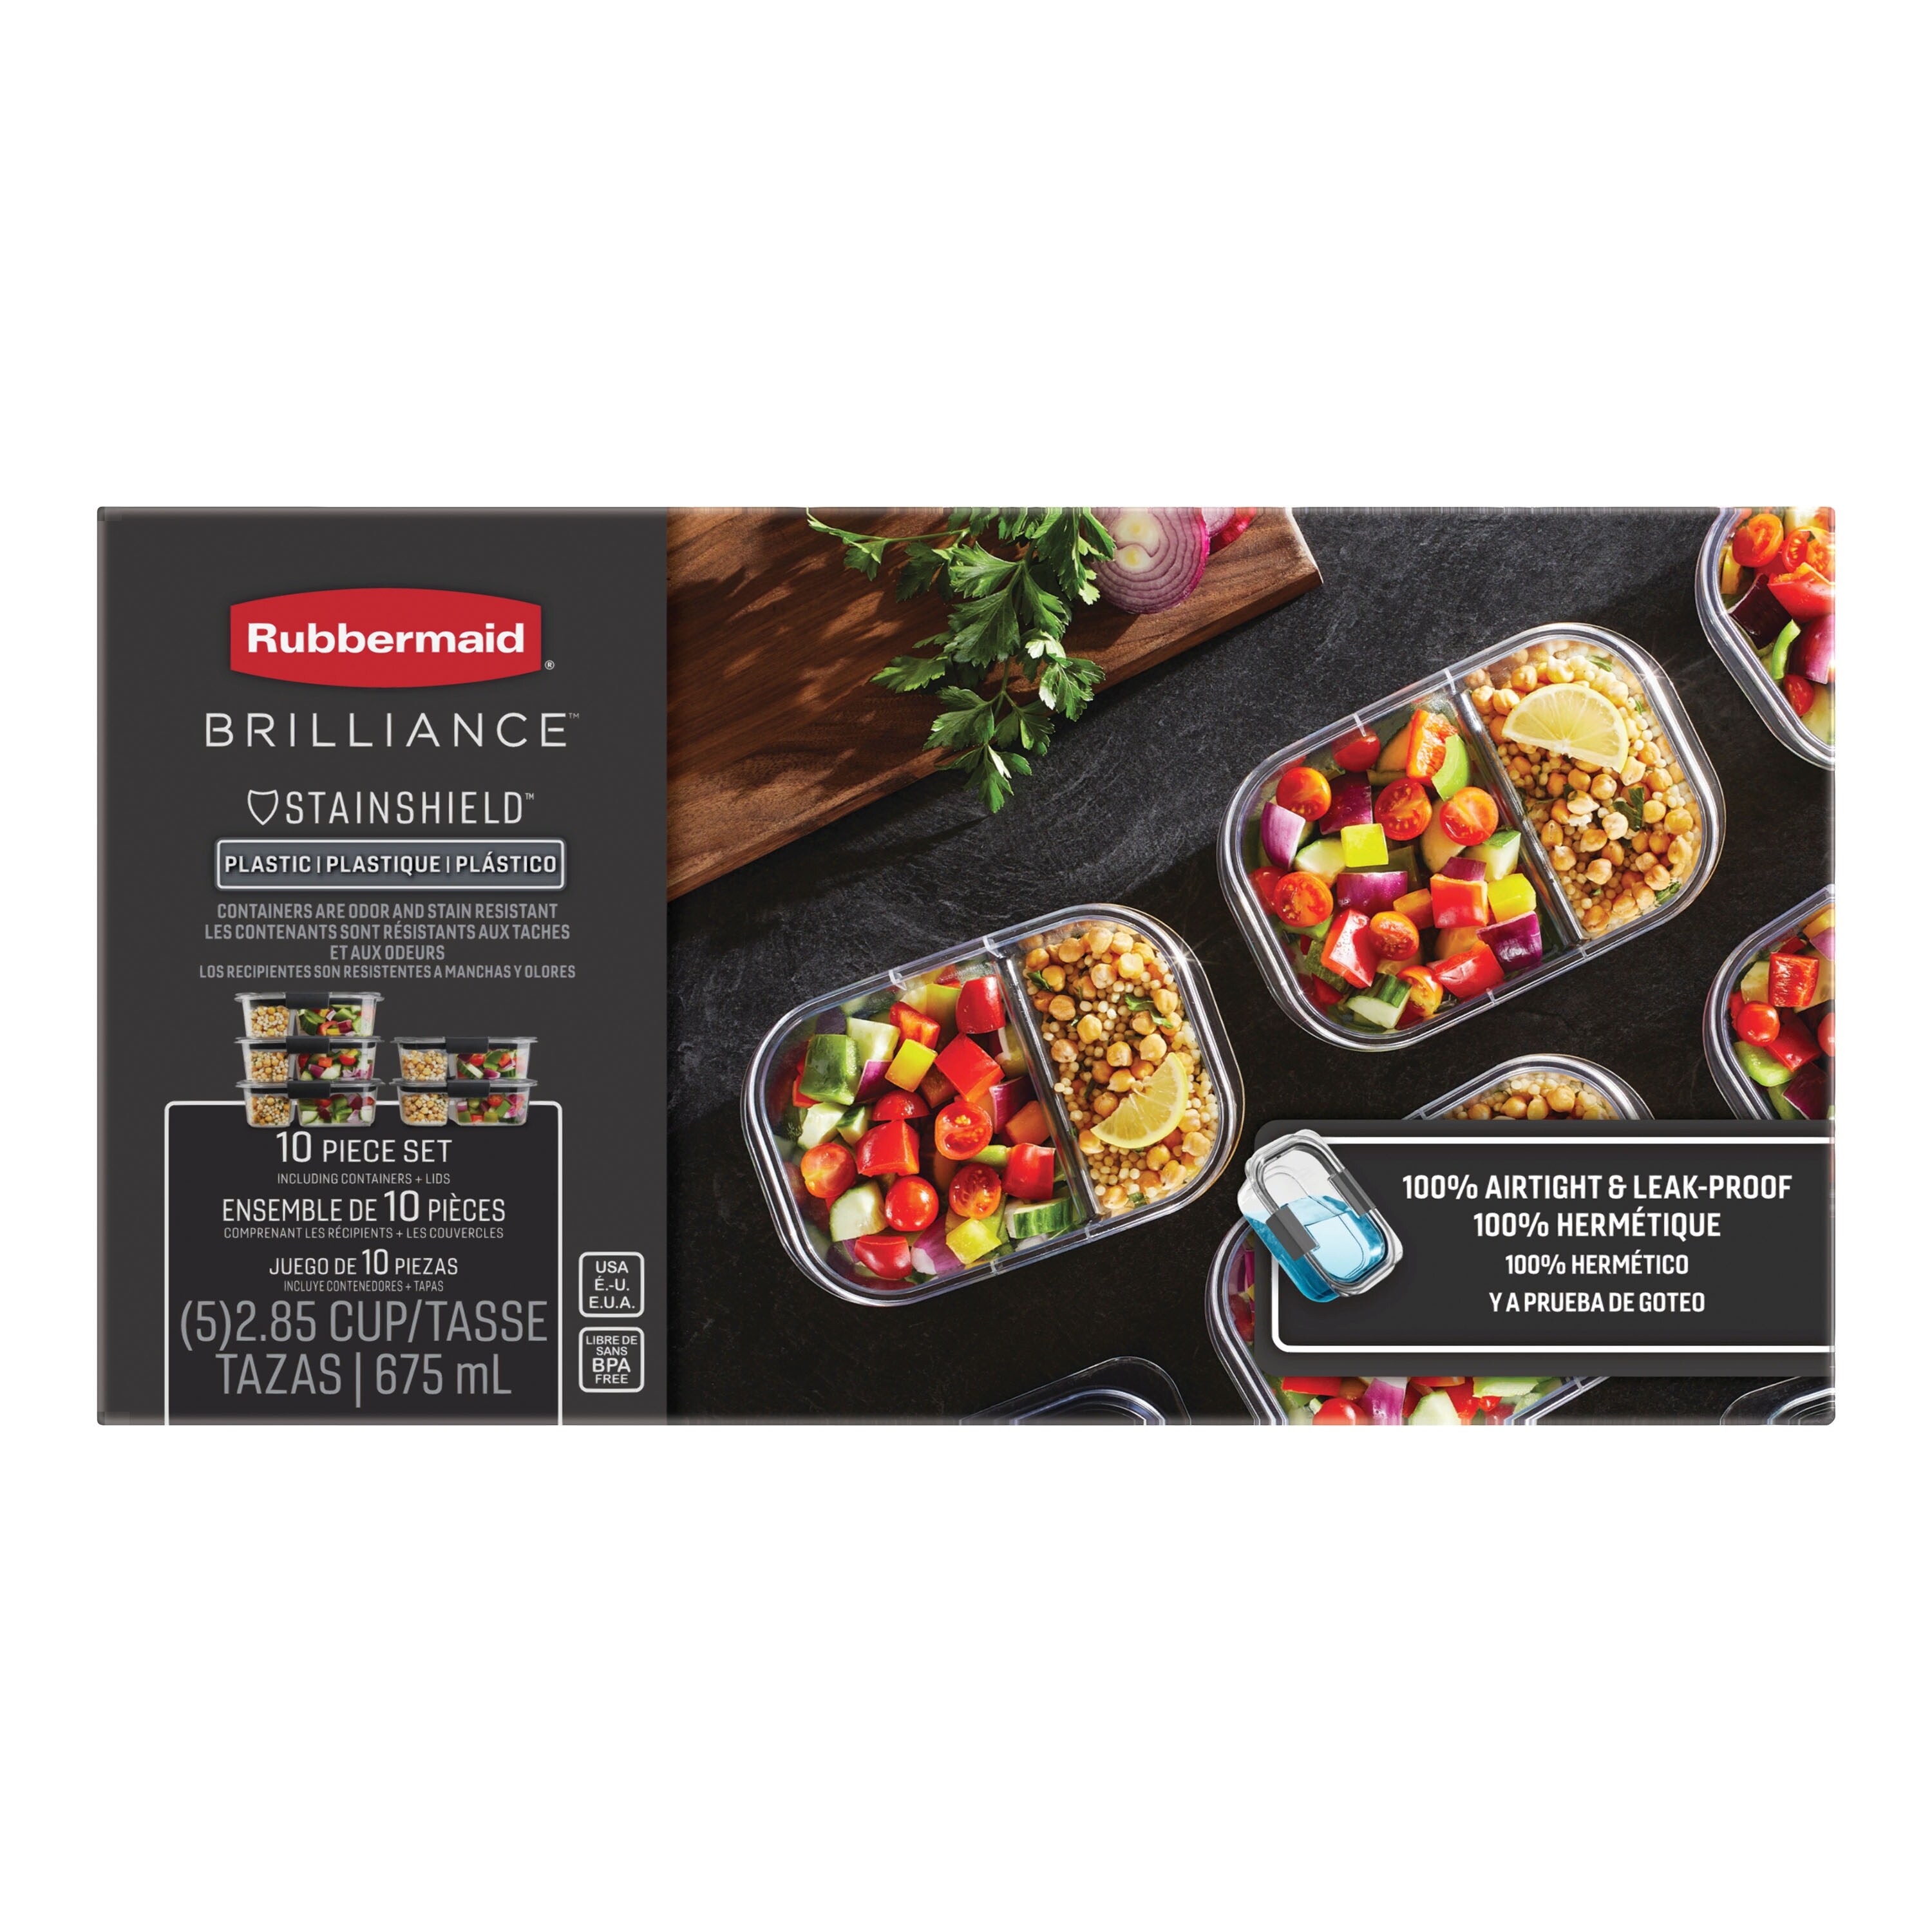 https://ak1.ostkcdn.com/images/products/is/images/direct/5e5802acf3f2bb334d48ae37eb95b8d04c6bc688/Rubbermaid-Brilliance-Meal-Prep-Containers-Set%2C-2-Compartment-Food-Storage-Containers%2C-2.85-Cup%2C-5-Pack.jpg